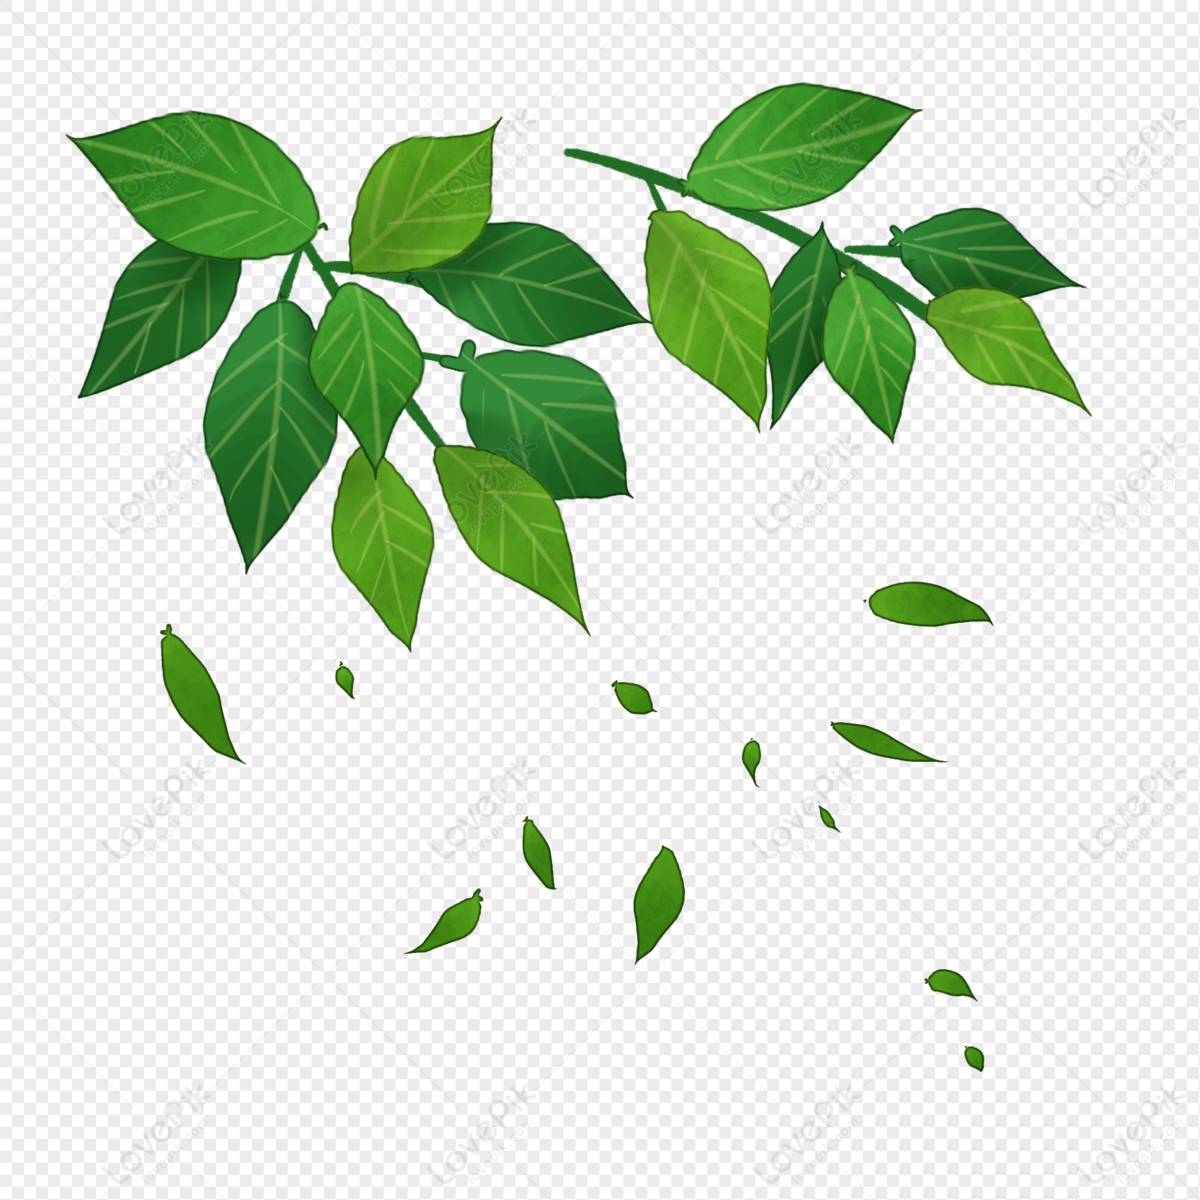 Cartoon Falling Leaves PNG Transparent Image And Clipart Image For Free  Download - Lovepik | 401569757